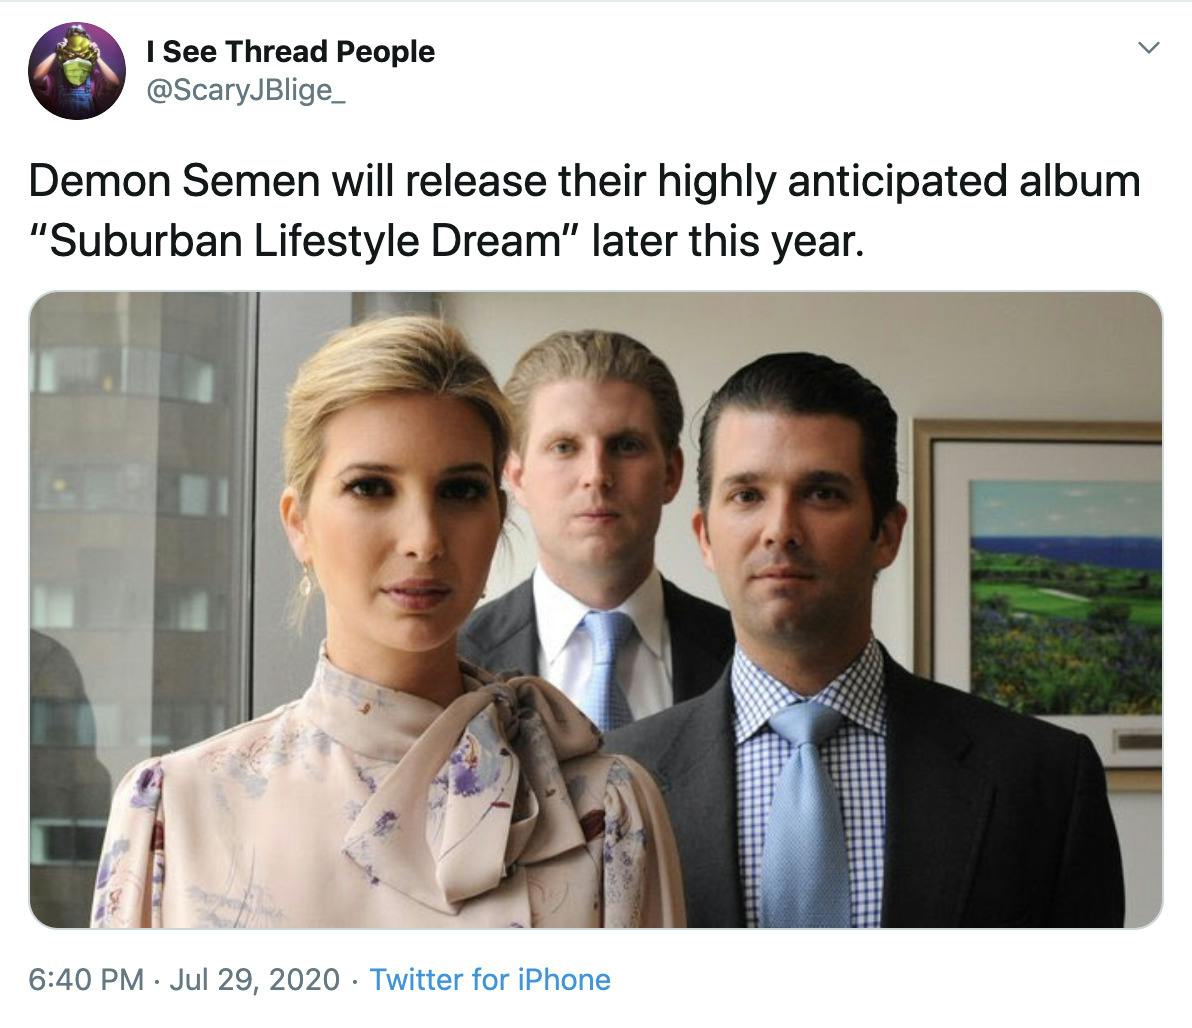 "Demon Semen will release their highly anticipated album “Suburban Lifestyle Dream” later this year." image of Ivanka, Eric and Don Jr